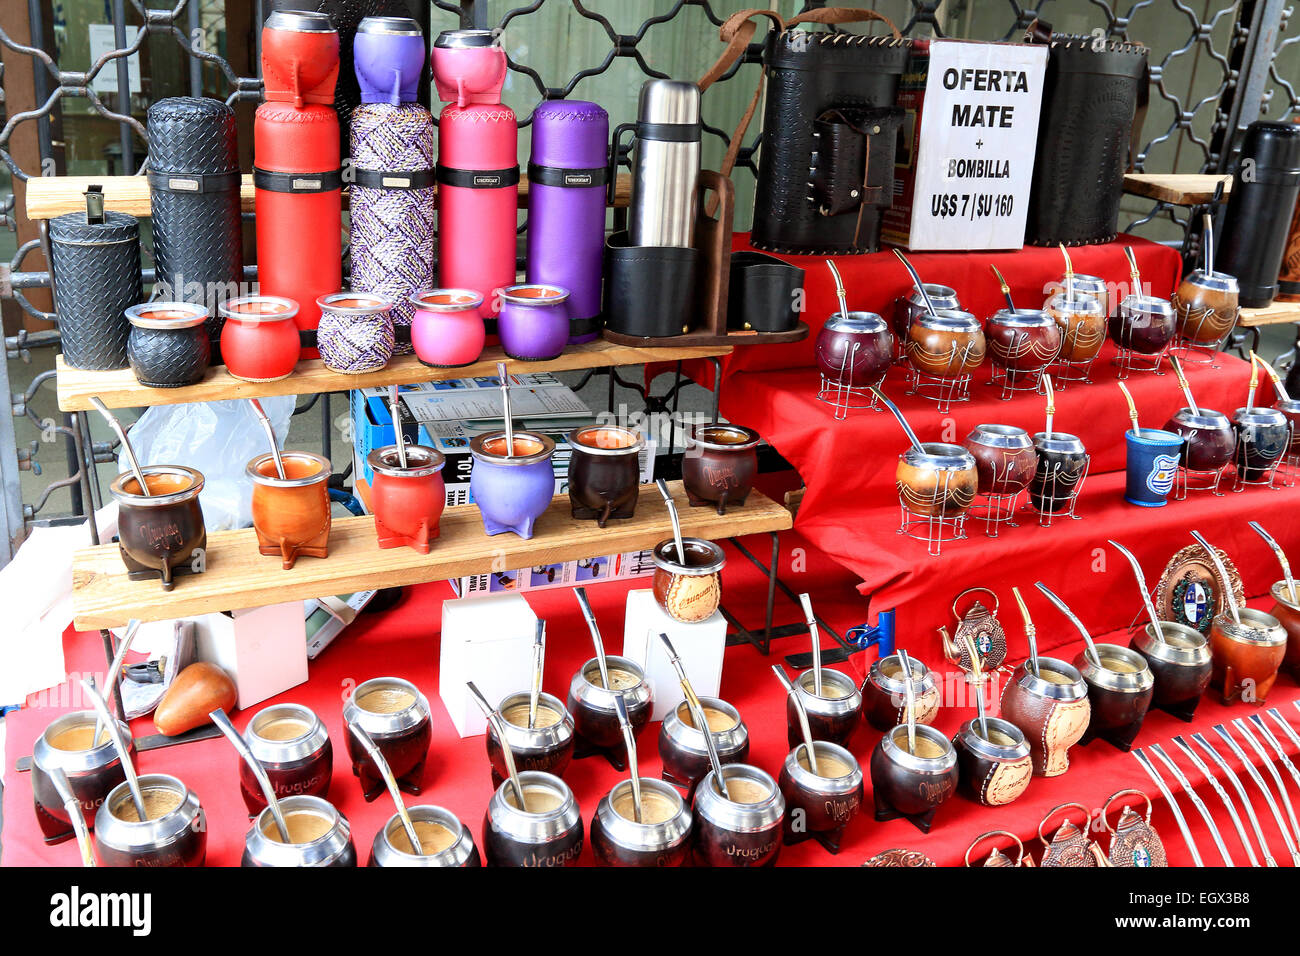 Montevideo Uruguay Old Town and mate cups. Stock Photo